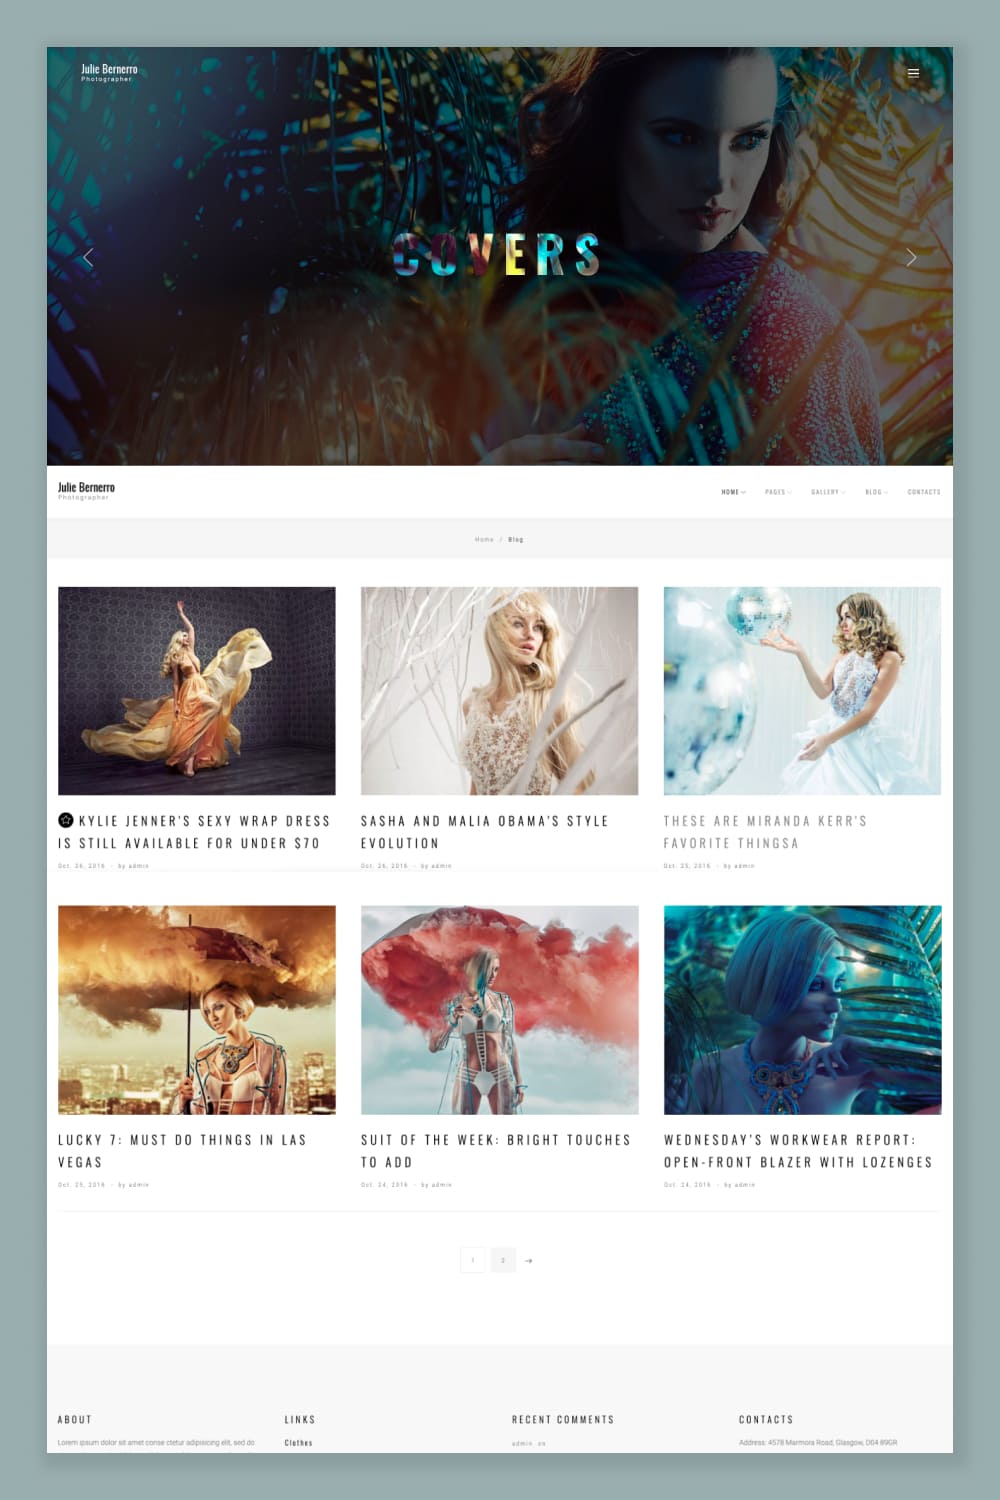 This beautiful theme for high-quality website.